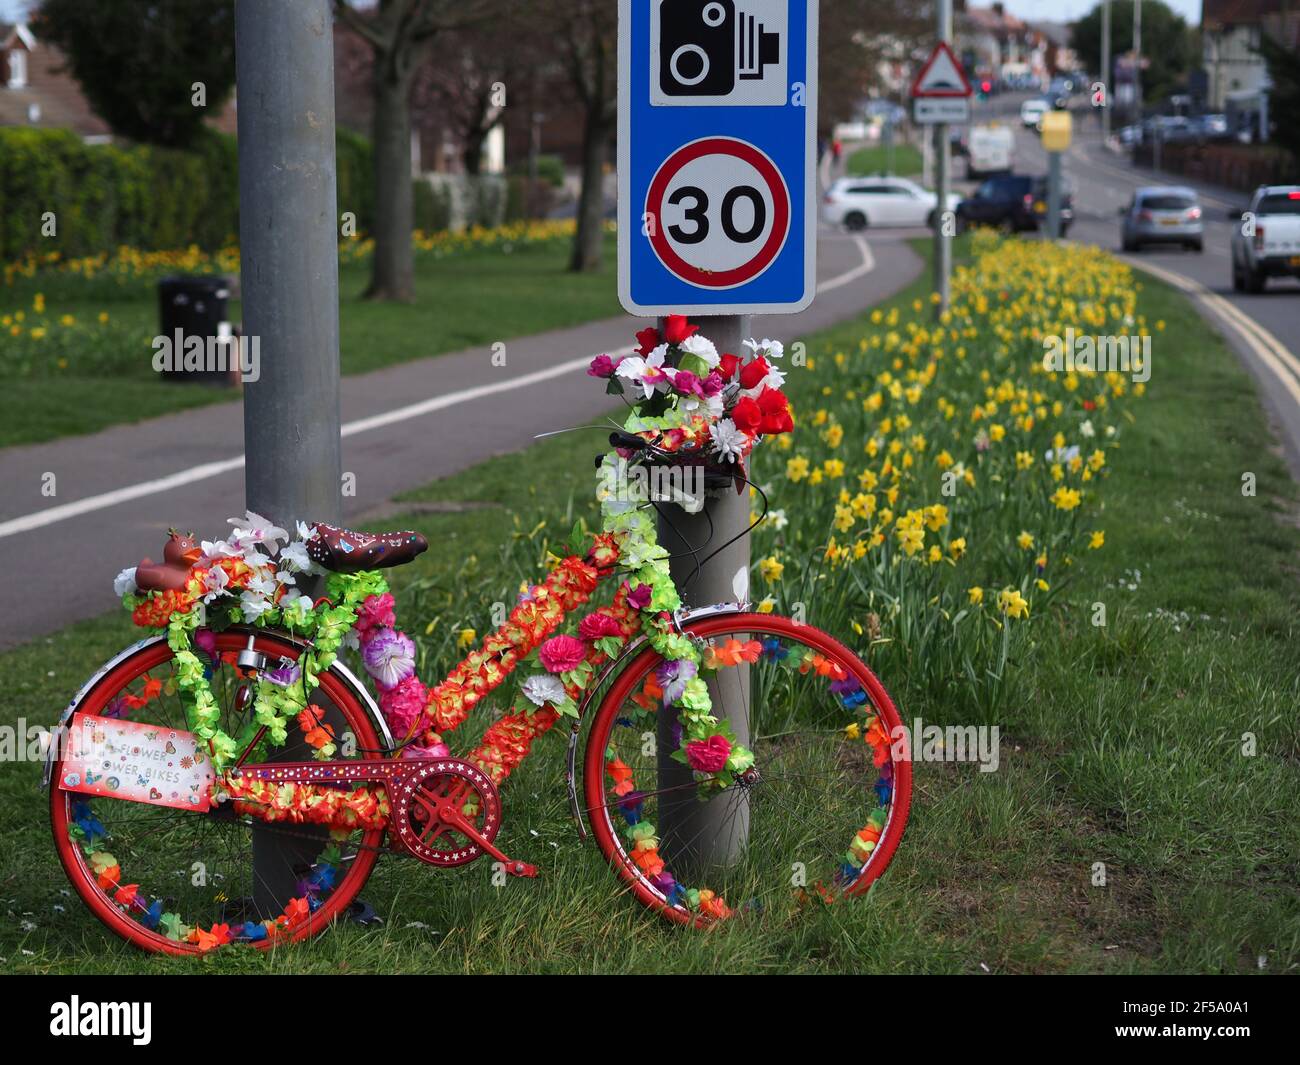 Rainham, Kent, UK. 25th Mar, 2021. A mystery artist has created some stunning 'Flower Power Bikes' around Rainham in Kent - which are bikes that have been artistically decorated with flowers to bring joy to people during lockdown. Credit: James Bell/Alamy Live News Stock Photo